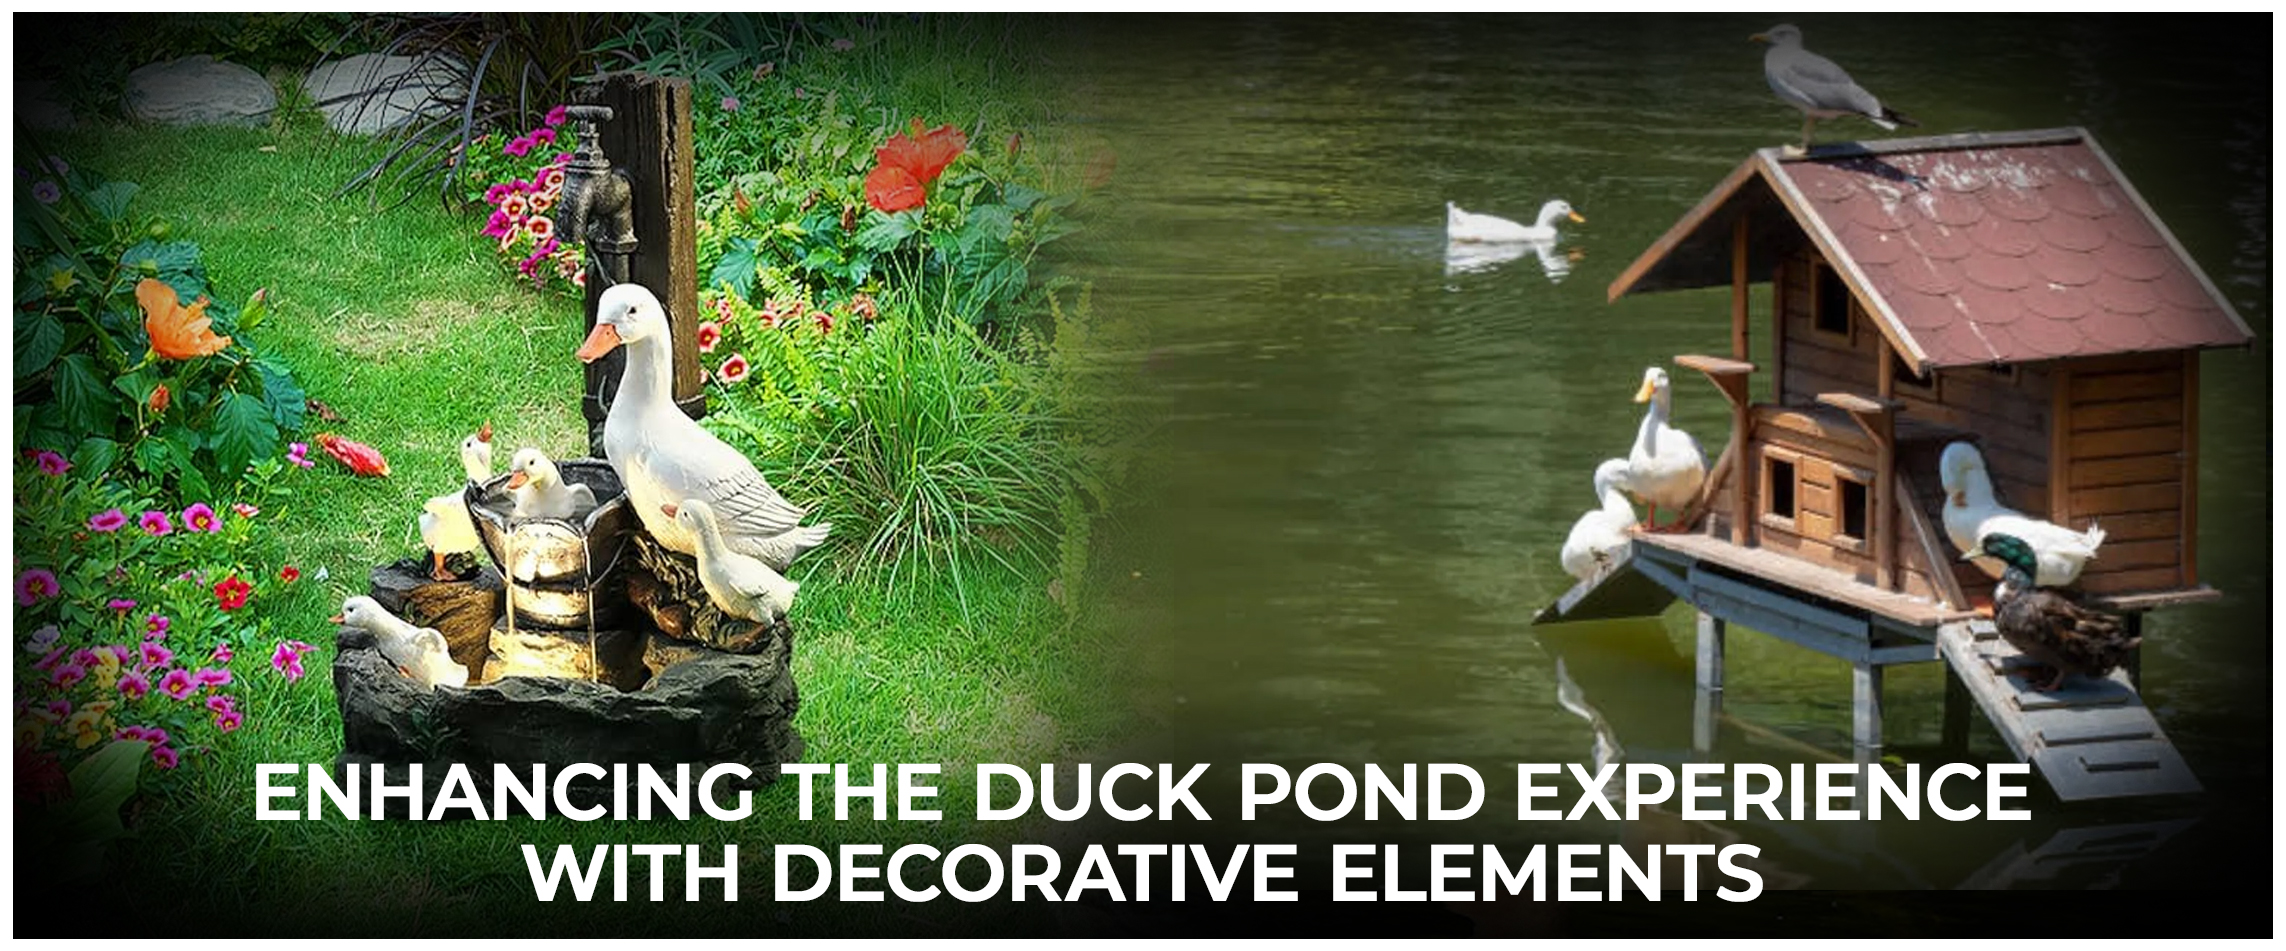  Enhancing the Duck Pond Experience with Decorative Elements